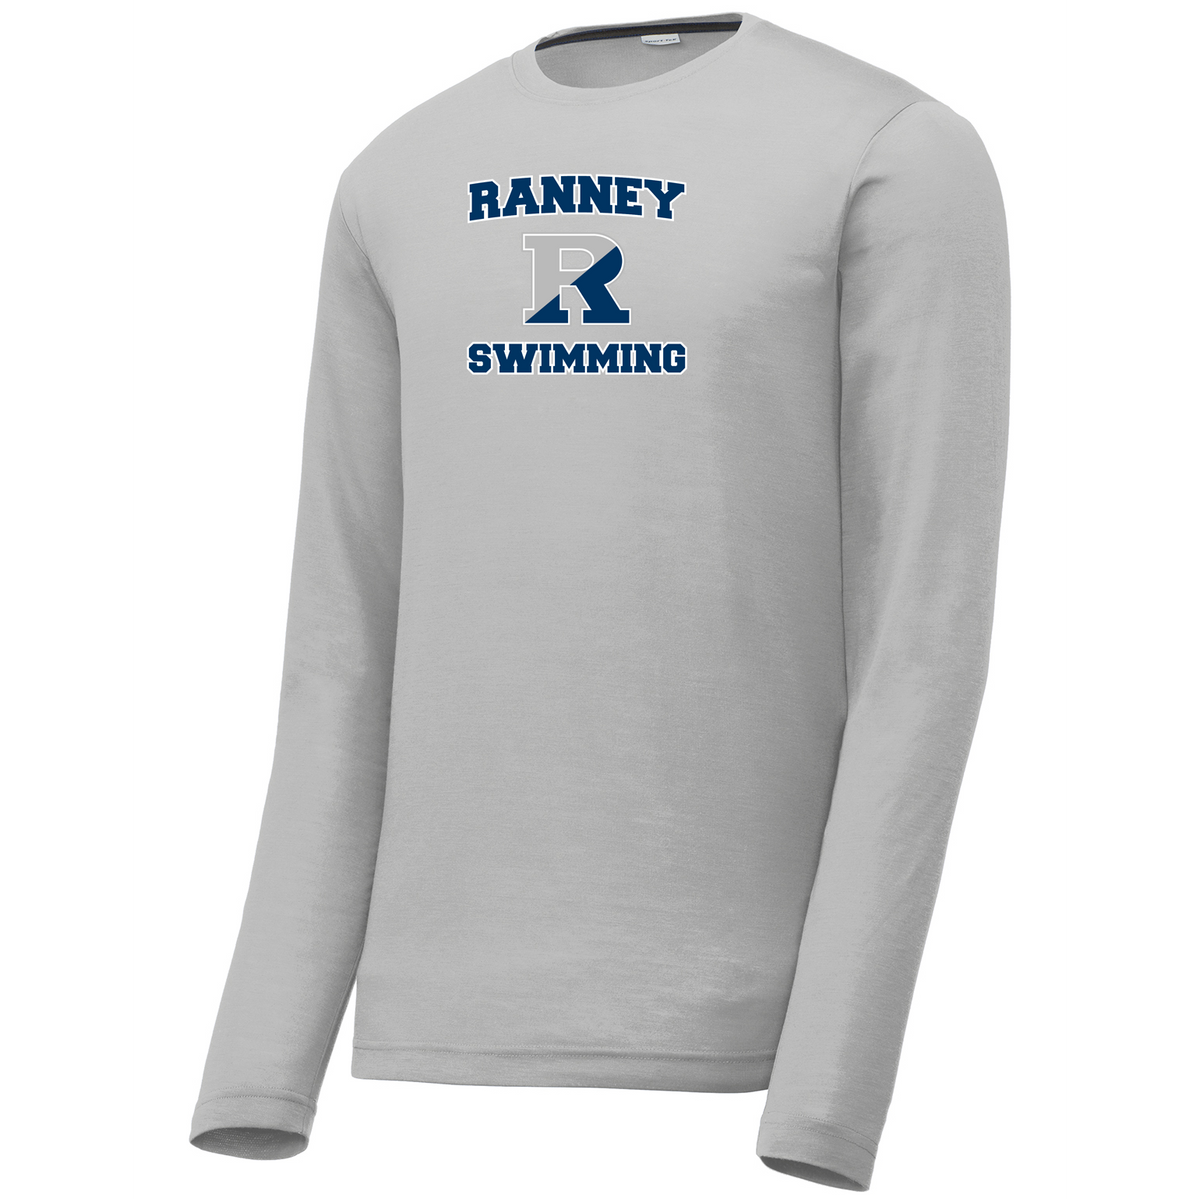 Ranney Swimming Long Sleeve CottonTouch Performance Shirt